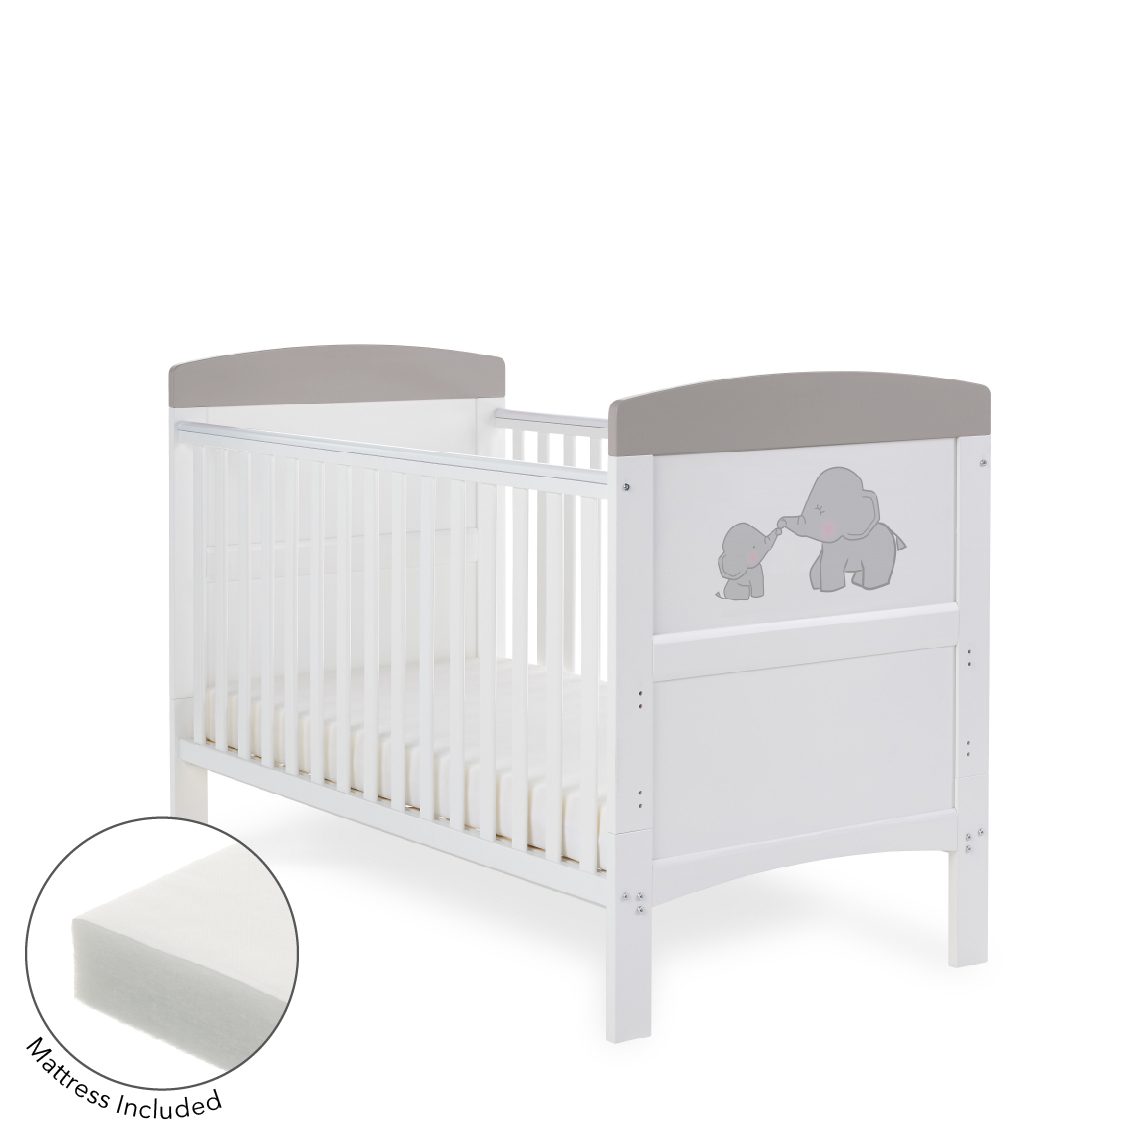 Obaby Grace Inspire Cot Bed & Fibre Mattress – Me & Mini Me Elephants – Grey -  | For Your Little One